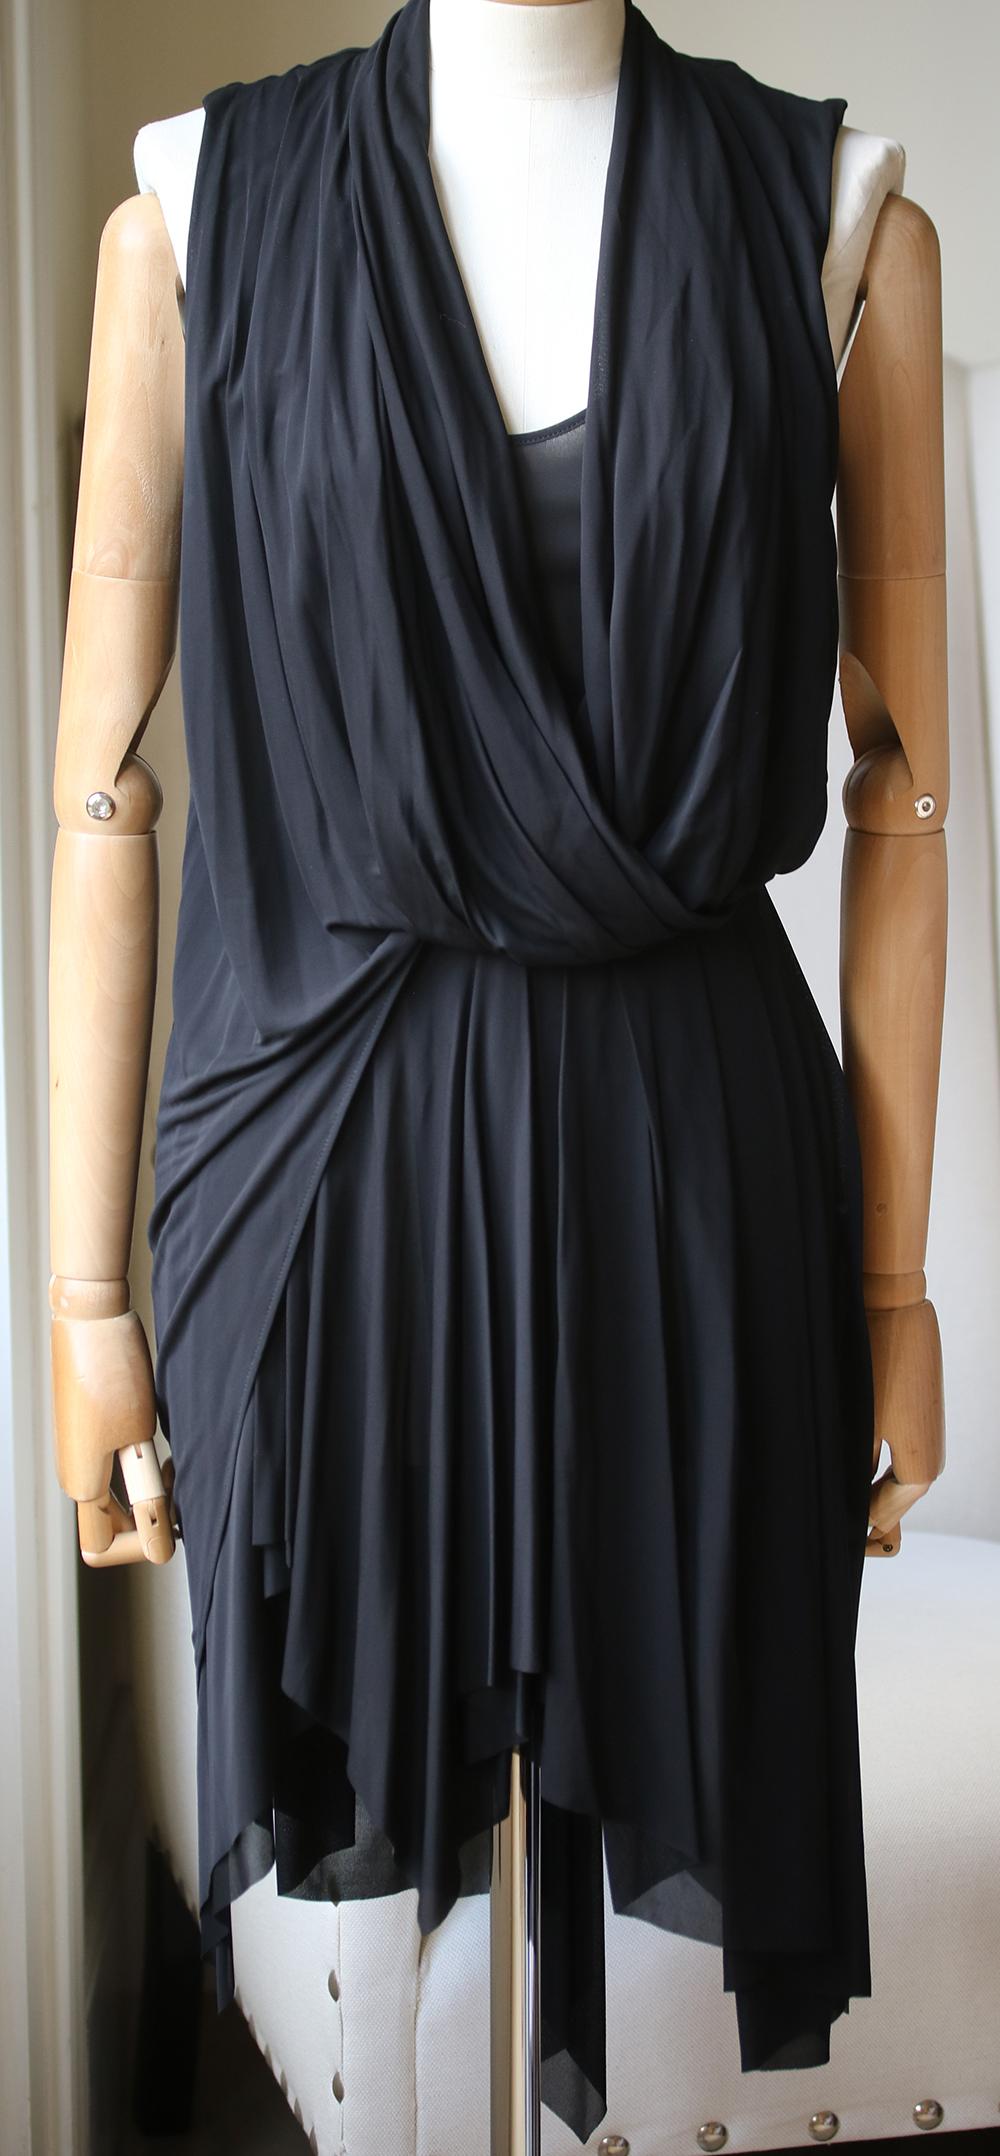 Crafted in France from voile draped, this mini dress is perfect on a hot evening night. Black draped dress. Round neckline. Racerback. Concealed zip-fastening down the side. Lined. Colour: black. 100% Viscose. Made in France.

Size: FR 36 (UK 8, US